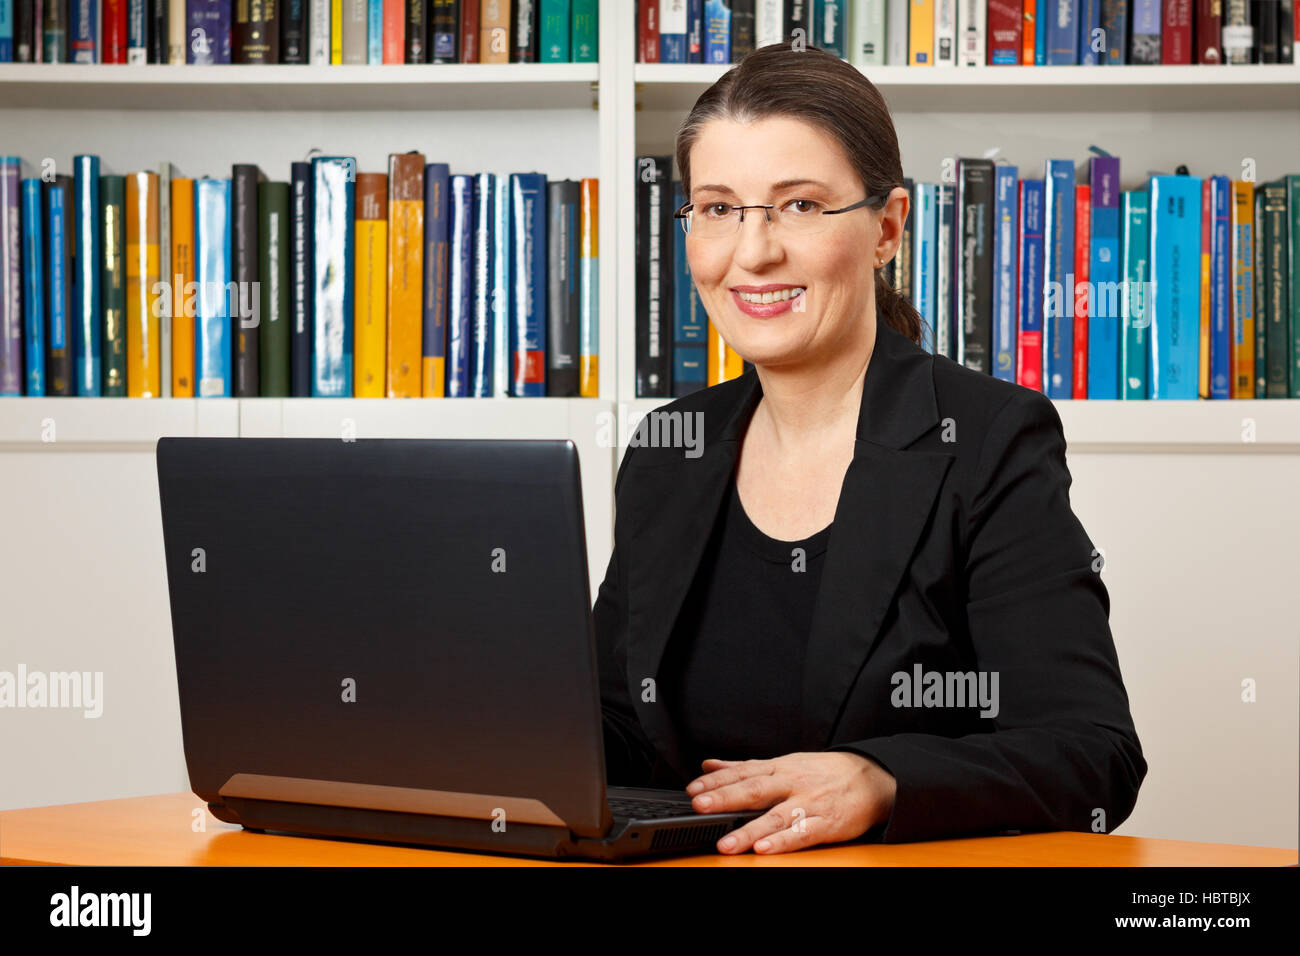 Friendly smiling woman in front of her laptop in a library, teacher, tutor, professor, consultant, consultancy Stock Photo